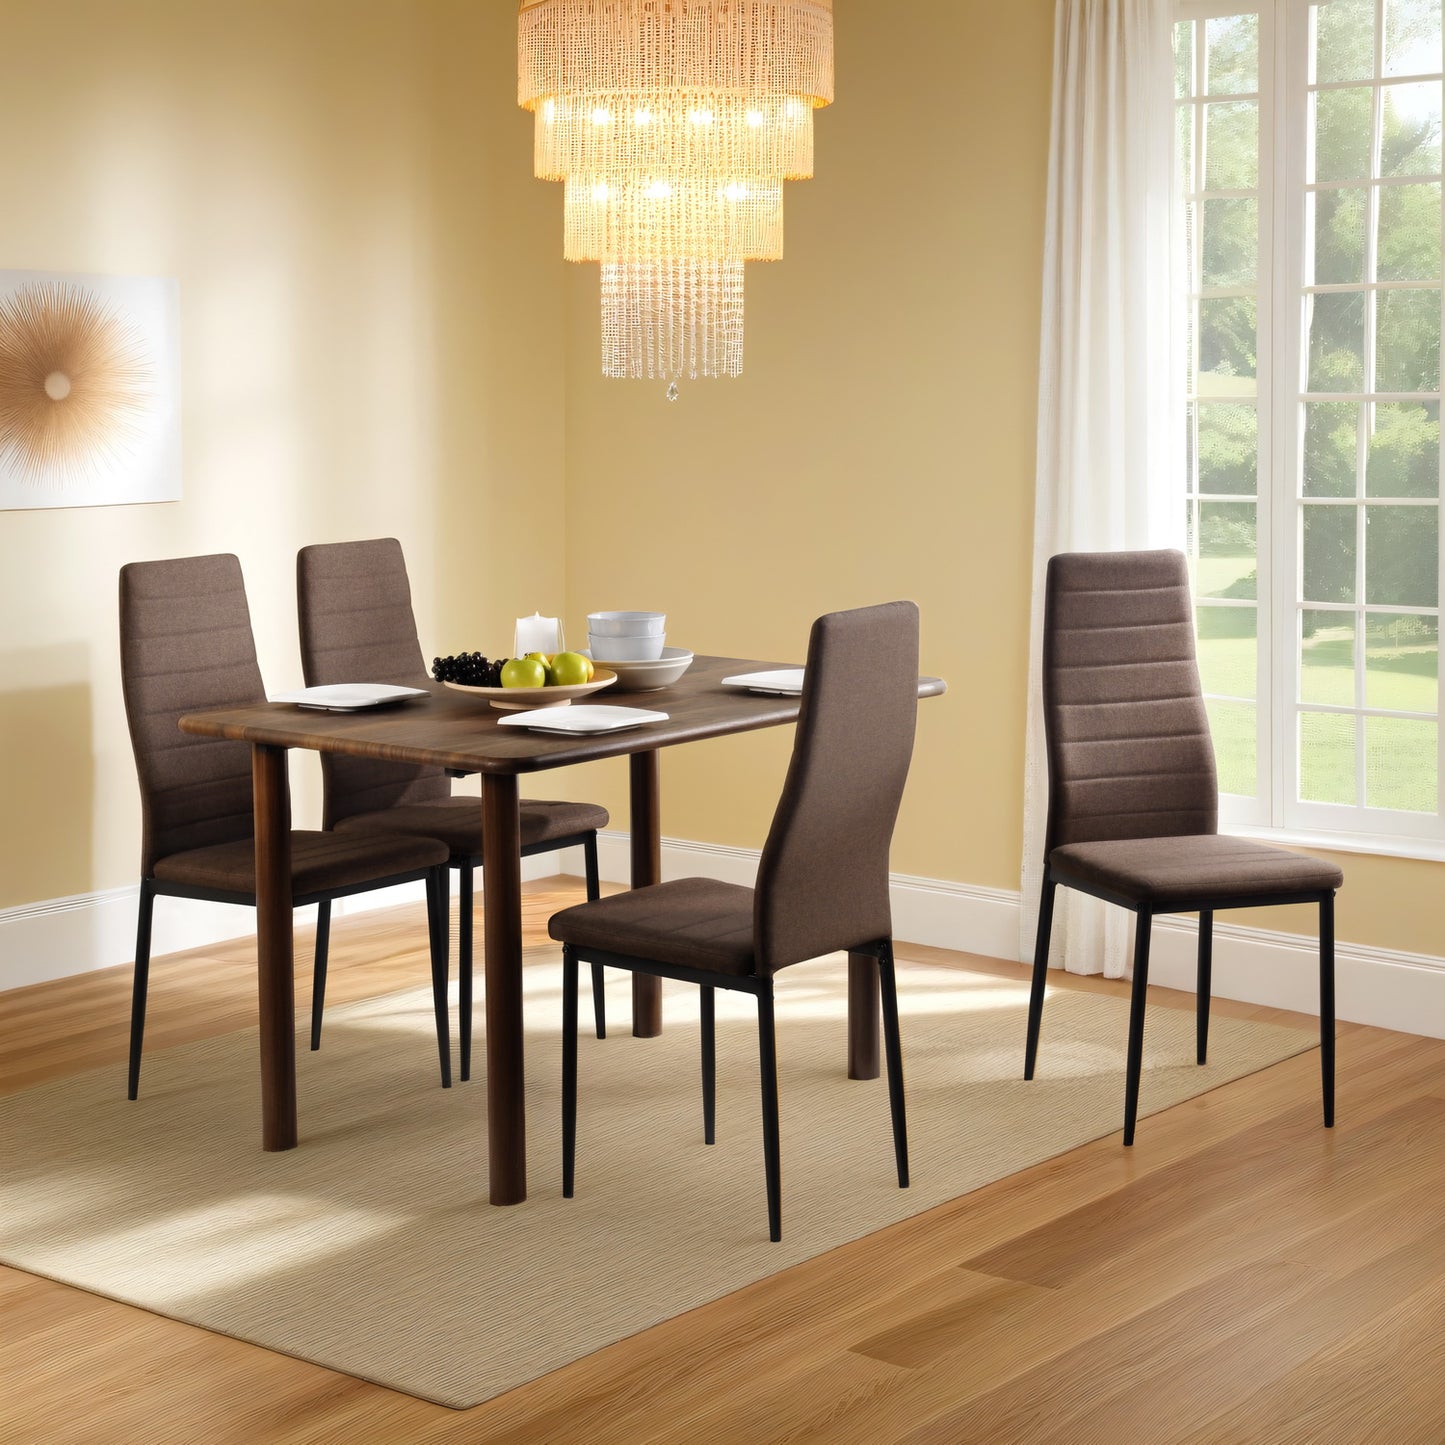 ANN Linen Dining Chair with Iron Legs - Brown